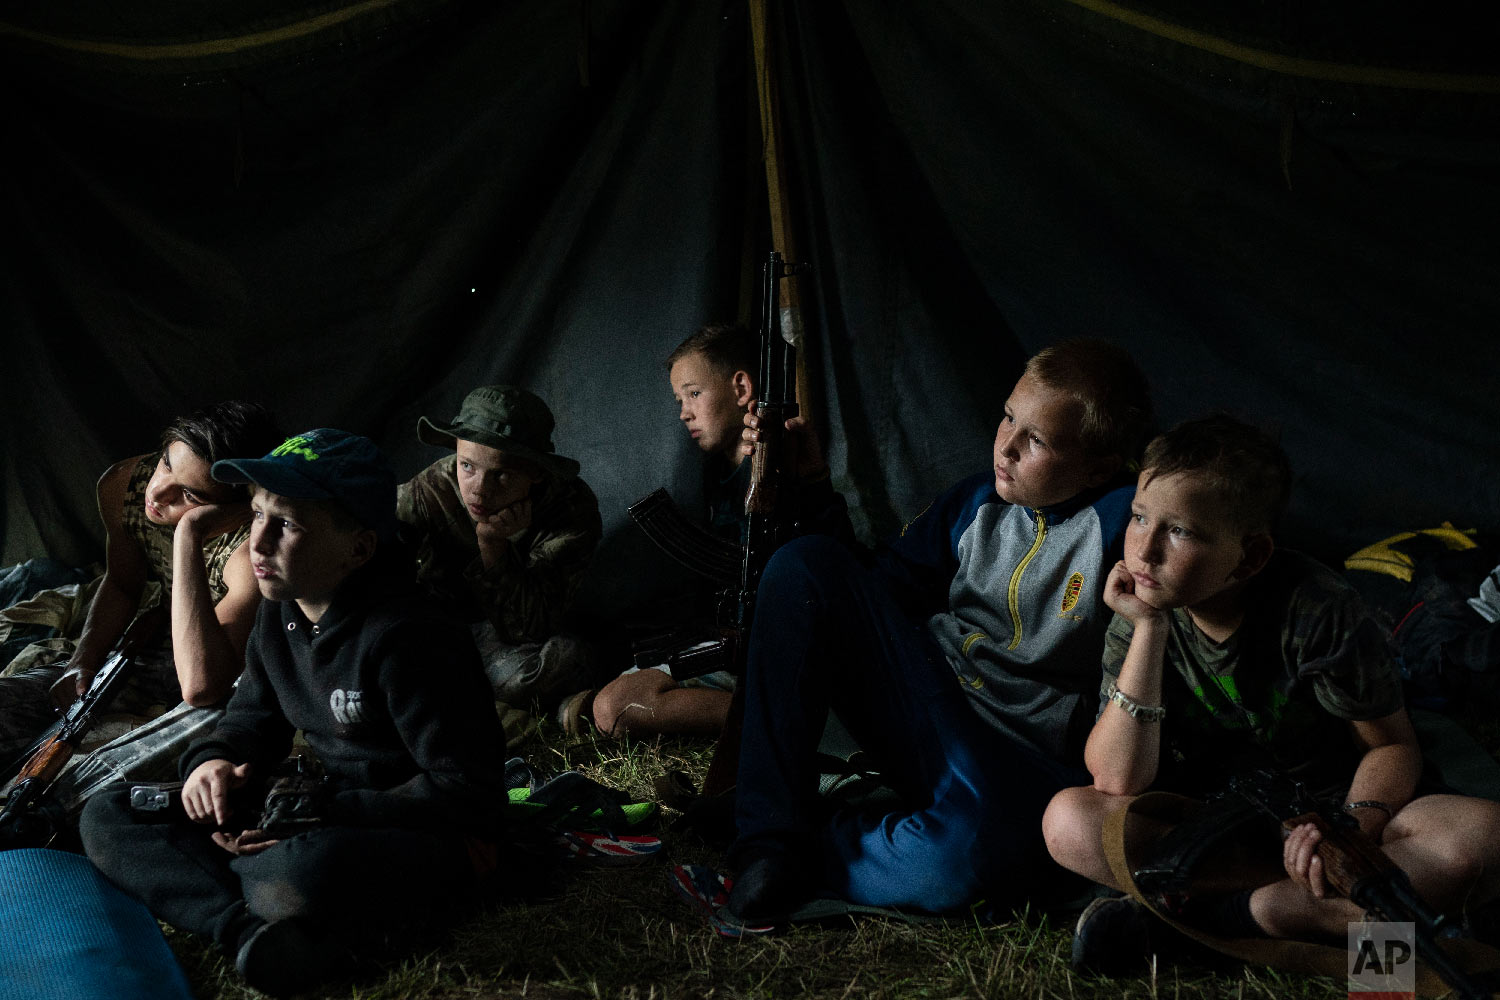  Young participants of the "Temper of will" summer camp, organized by the nationalist Svoboda party, sit inside a tent with their AK-47 riffles as they receive instructions during a tactical exercise in a village near Ternopil, Ukraine on July 28, 20